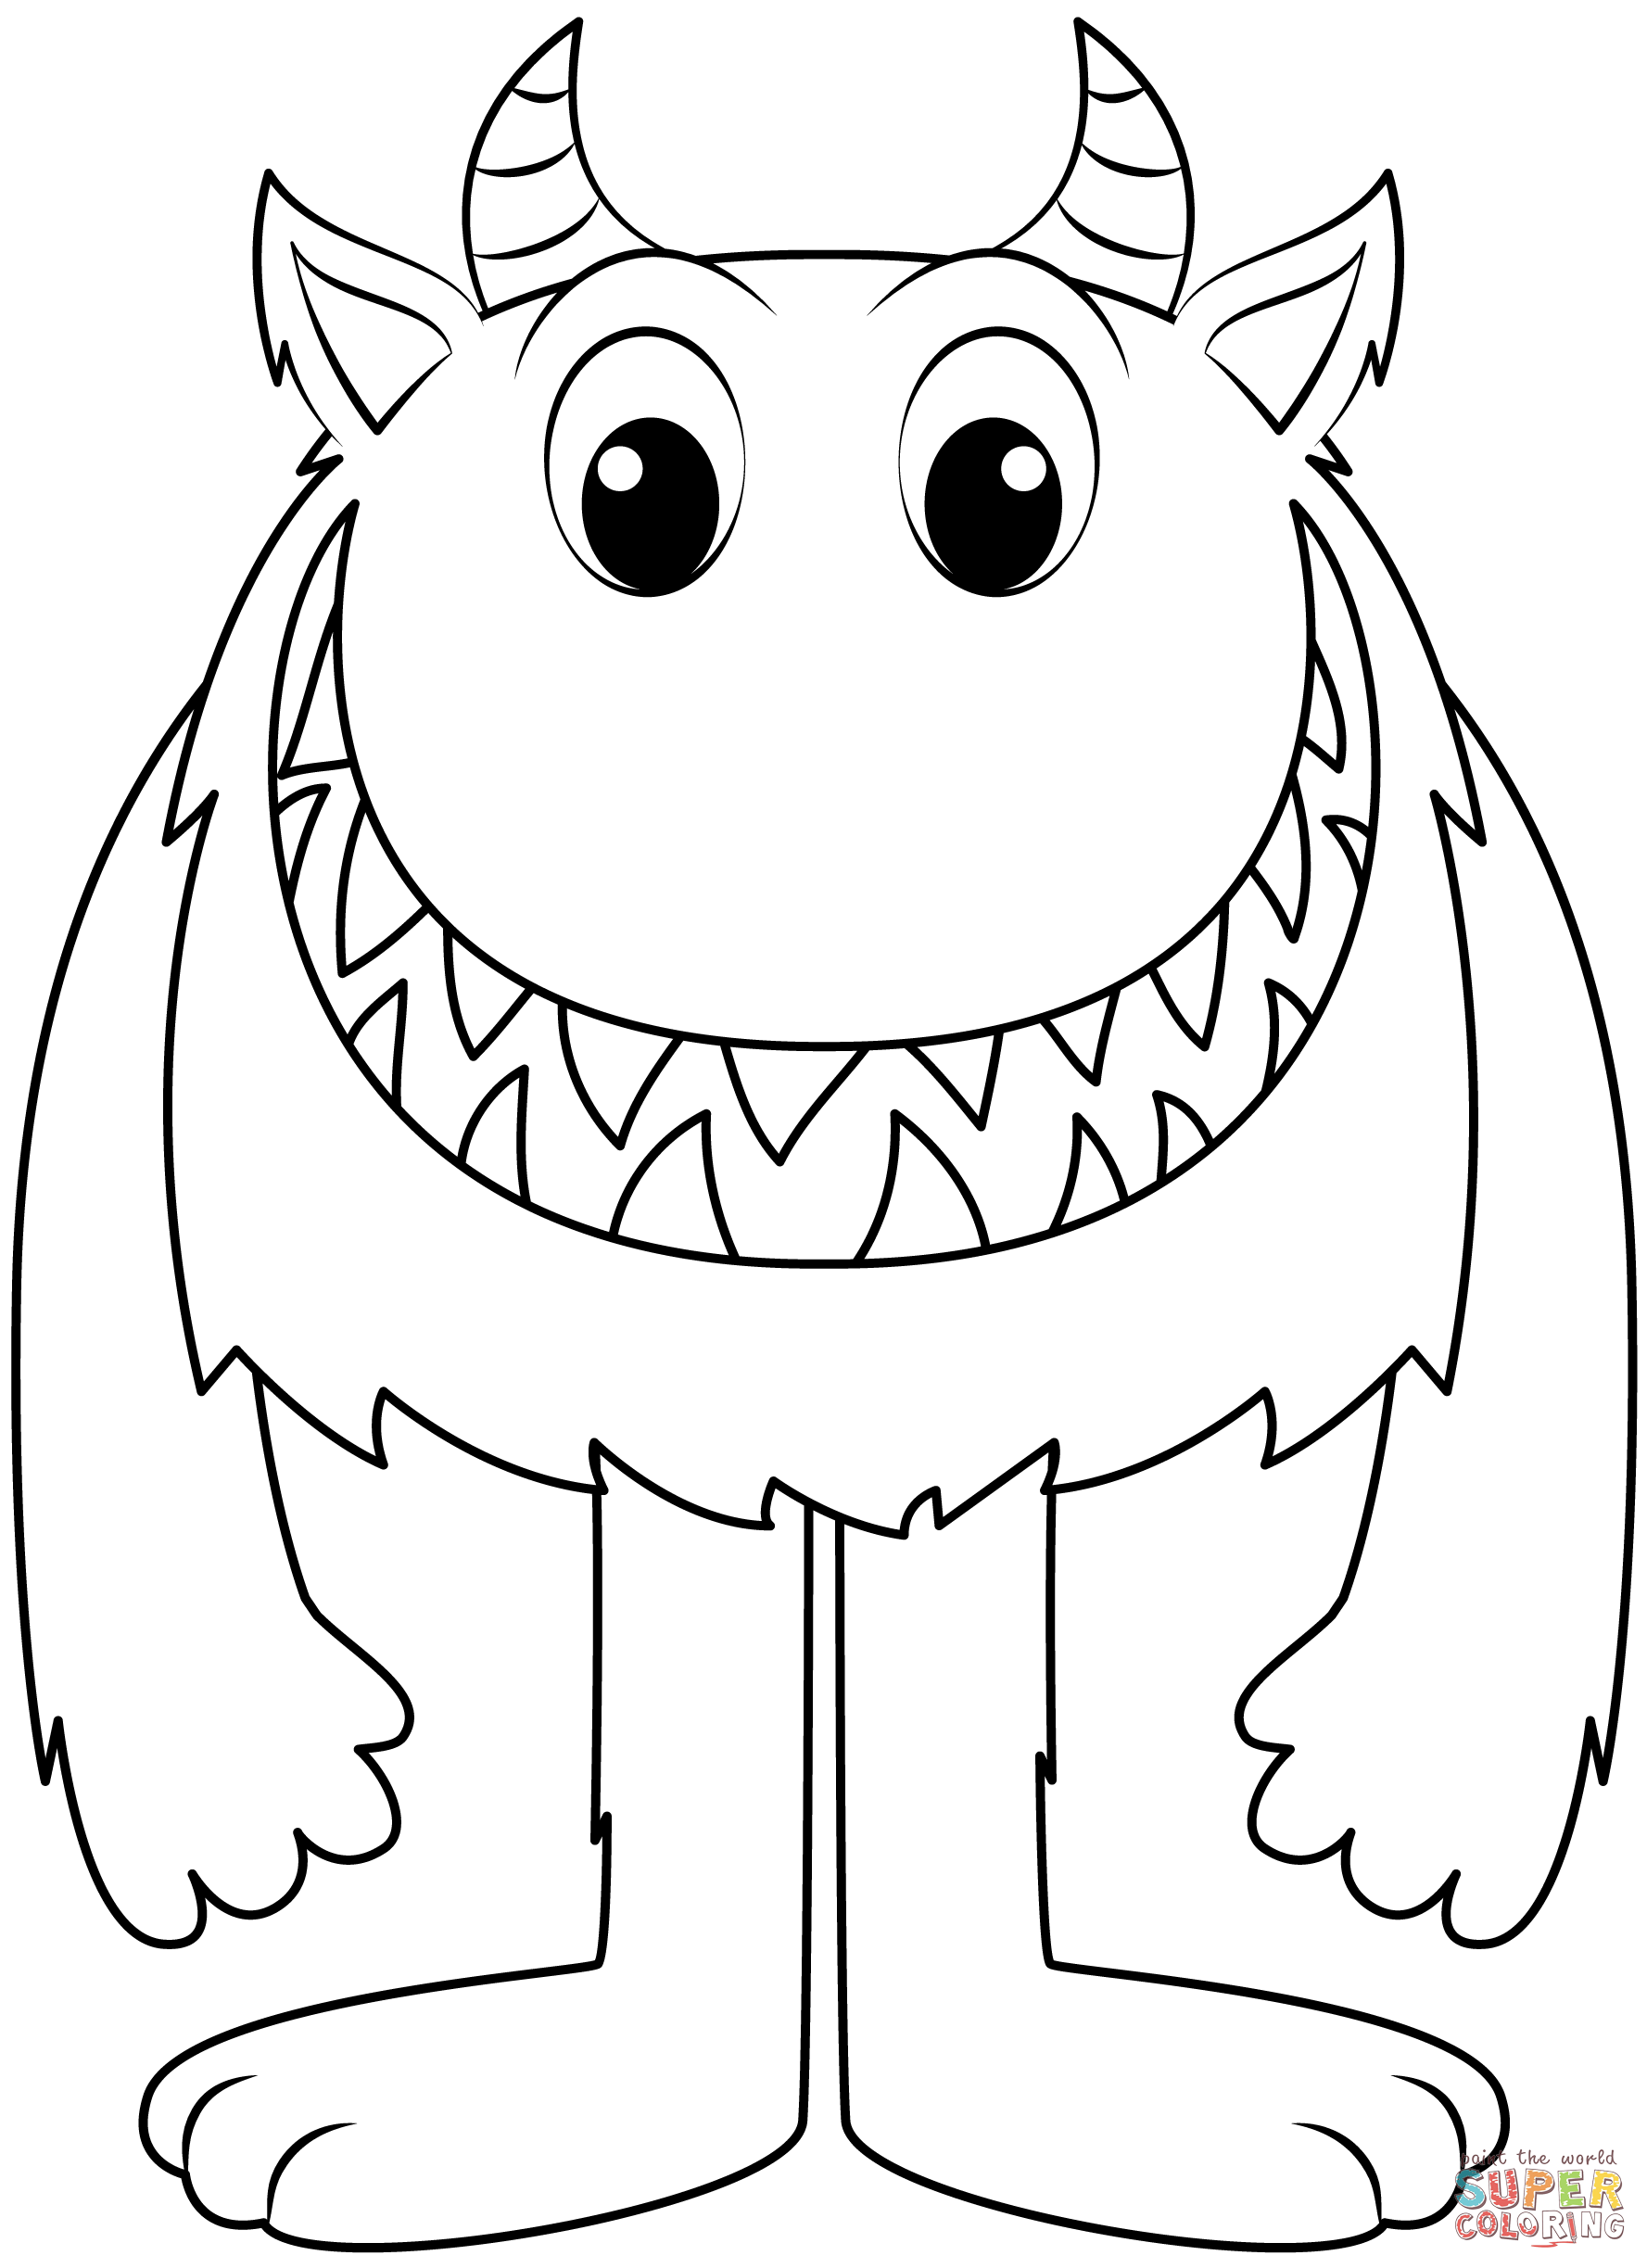 Cute Monsters Coloring Pages - Coloring Home